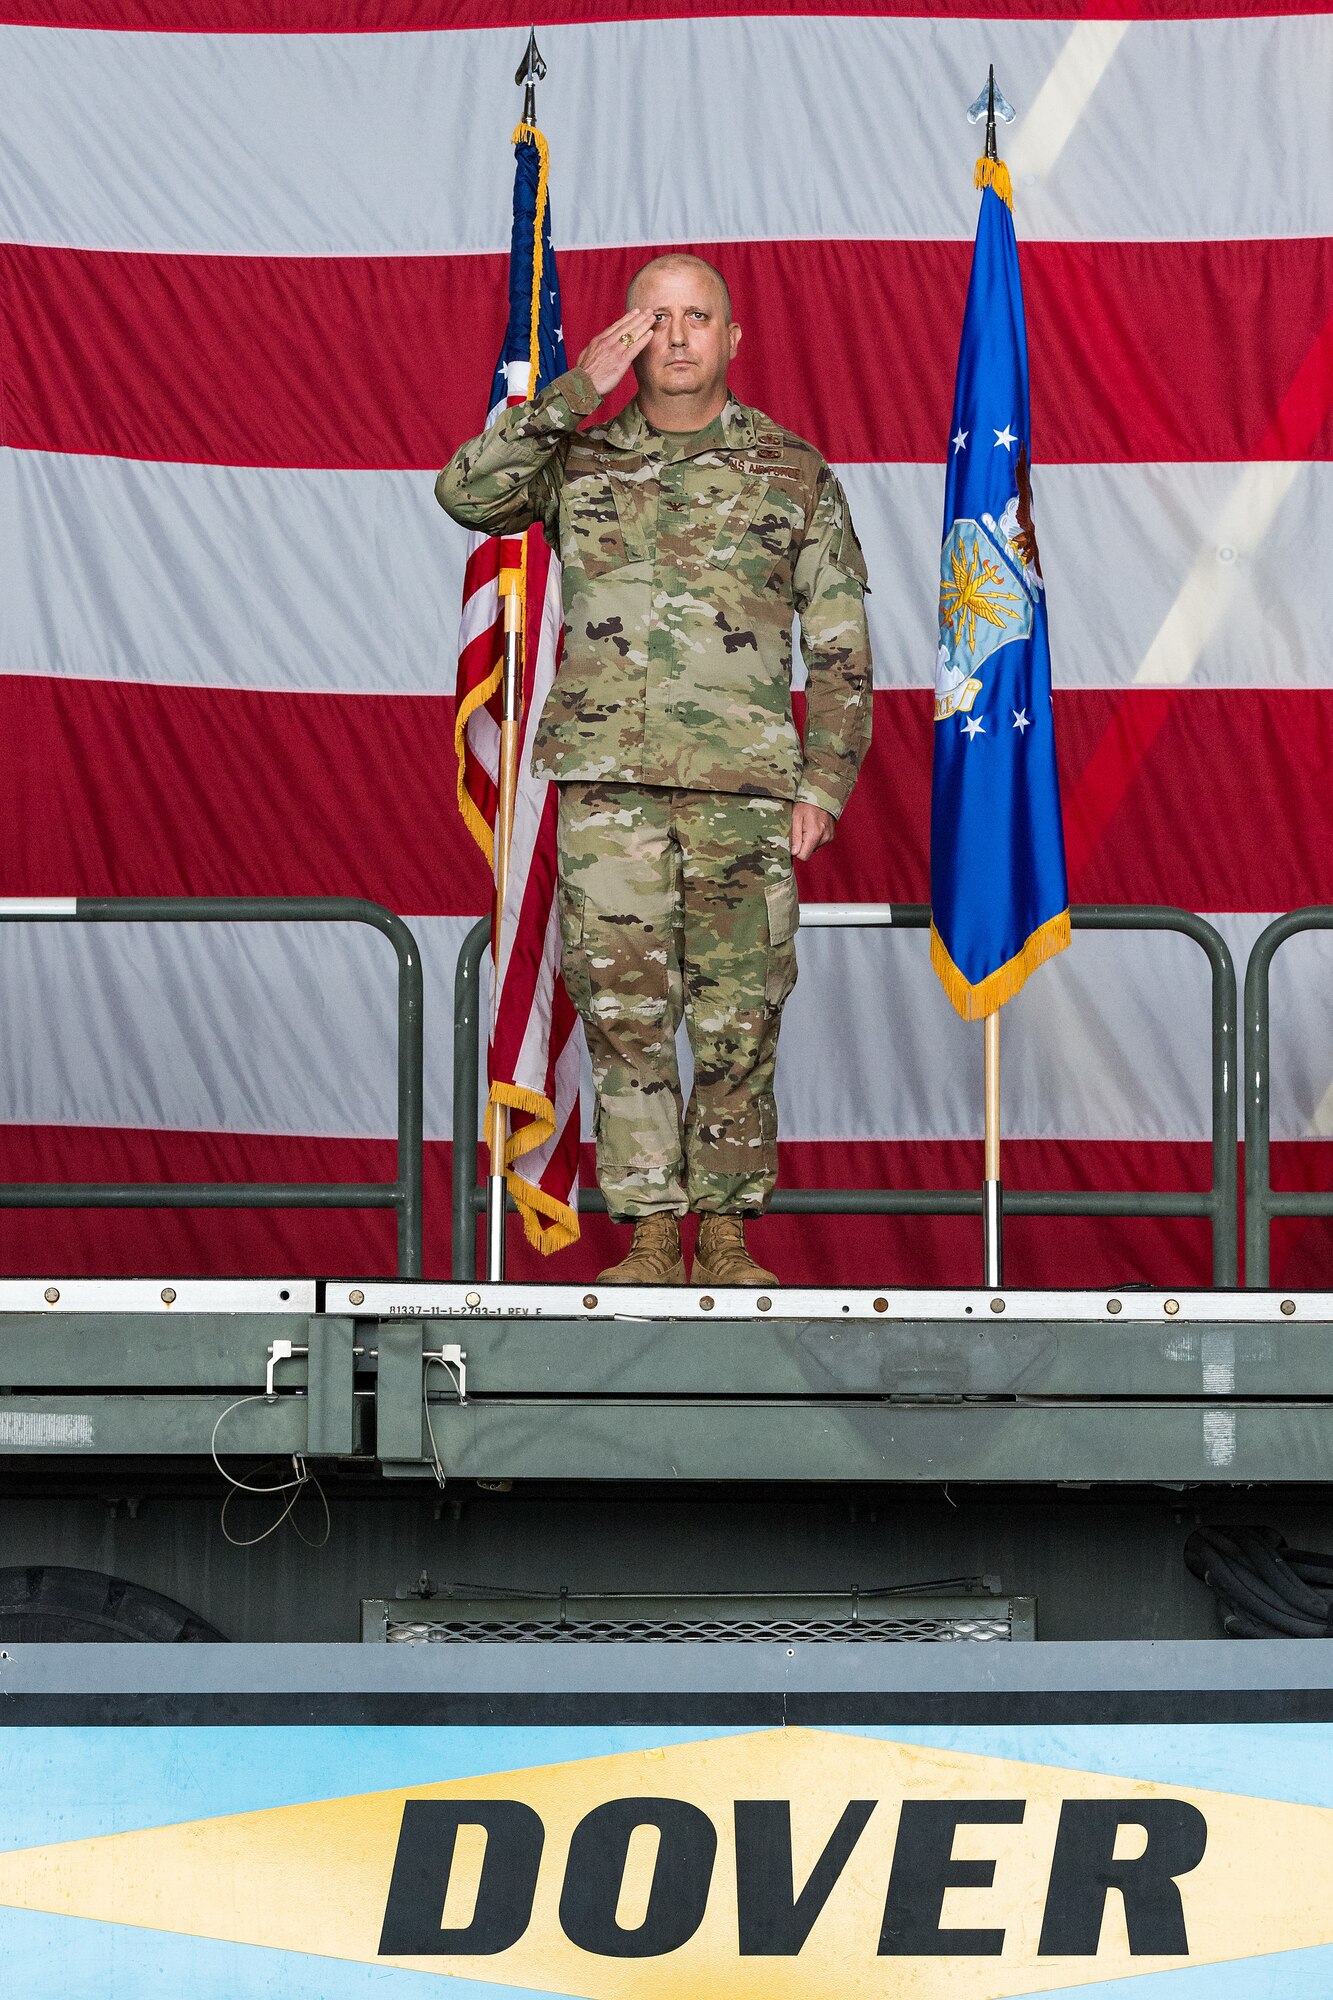 Col. Bary Flack, 436th Maintenance Group commander, receives his first salute from a formation of Airmen during the 436th MXG Change of Command ceremony on Dover Air Force Base, Delaware, June 11, 2021. Col. Christopher May relinquished command to Flack in a ceremony officiated by Col. Matt Husemann, 436th Airlift Wing commander. The 436th MXG supports the worldwide global mobility mission by providing trained maintenance specialists for two of the Air Force's cargo transport aircraft, the C-5M Super Galaxy and the C-17A Globemaster III. (U.S. Air Force photo by Roland Balik)